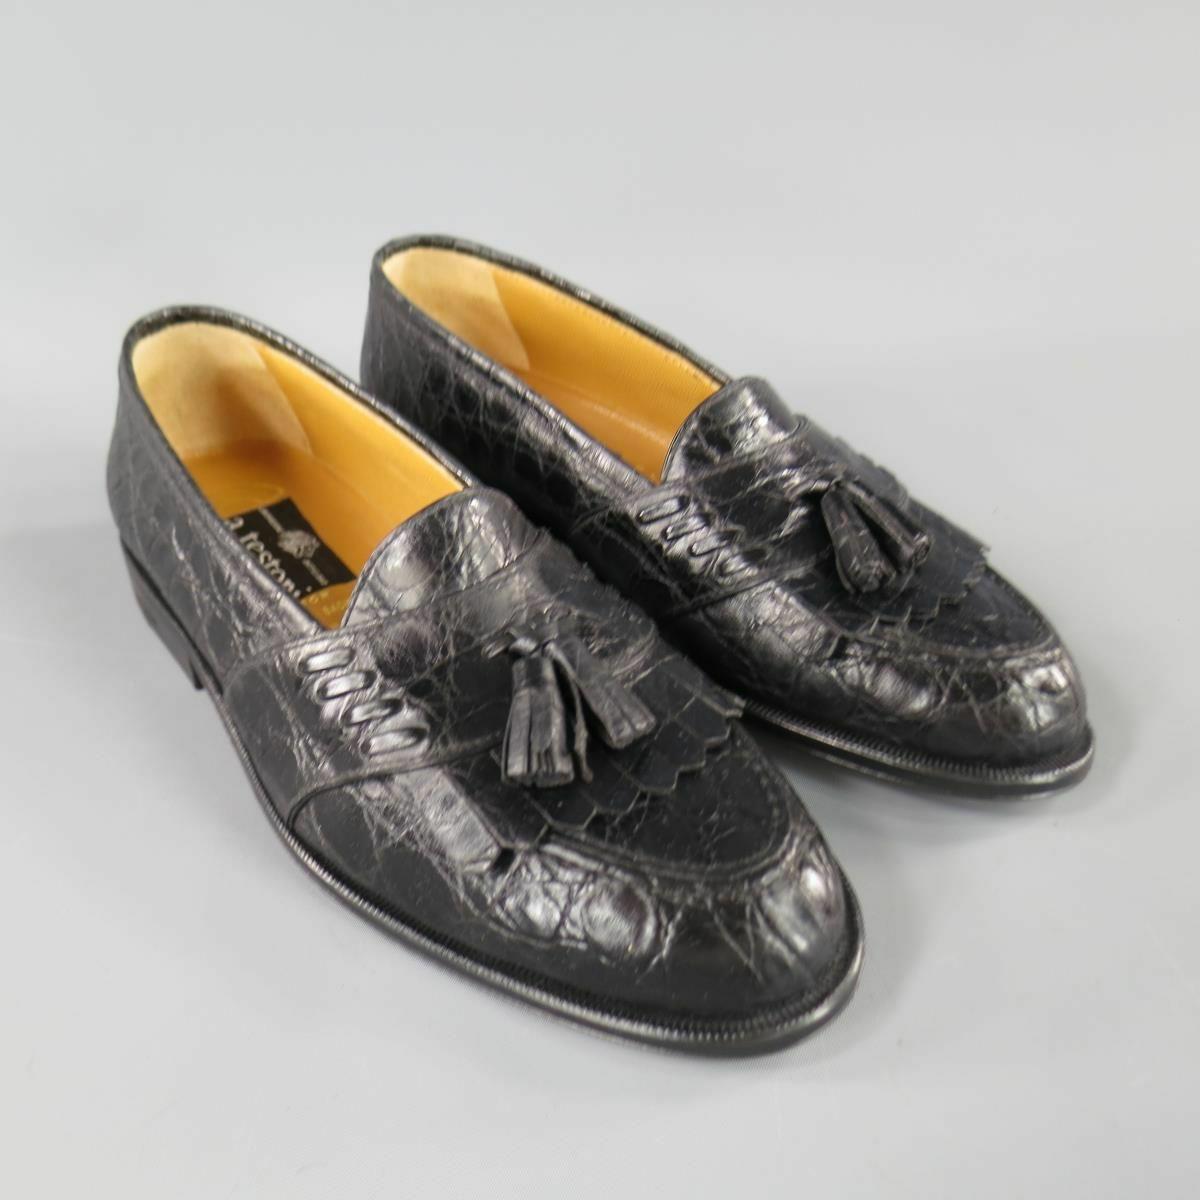 A. TESTONI for WILKES BASHFORD Loafers are alligator leather and feature tradition fringe and tassel detail along the toe in black, made in Italy.
 
Excellent Pre-Owned Condition    
Marked: 8.5
 
Measurements:
 
Insole: 10 in.
Width: 4 in.
Lift: 1